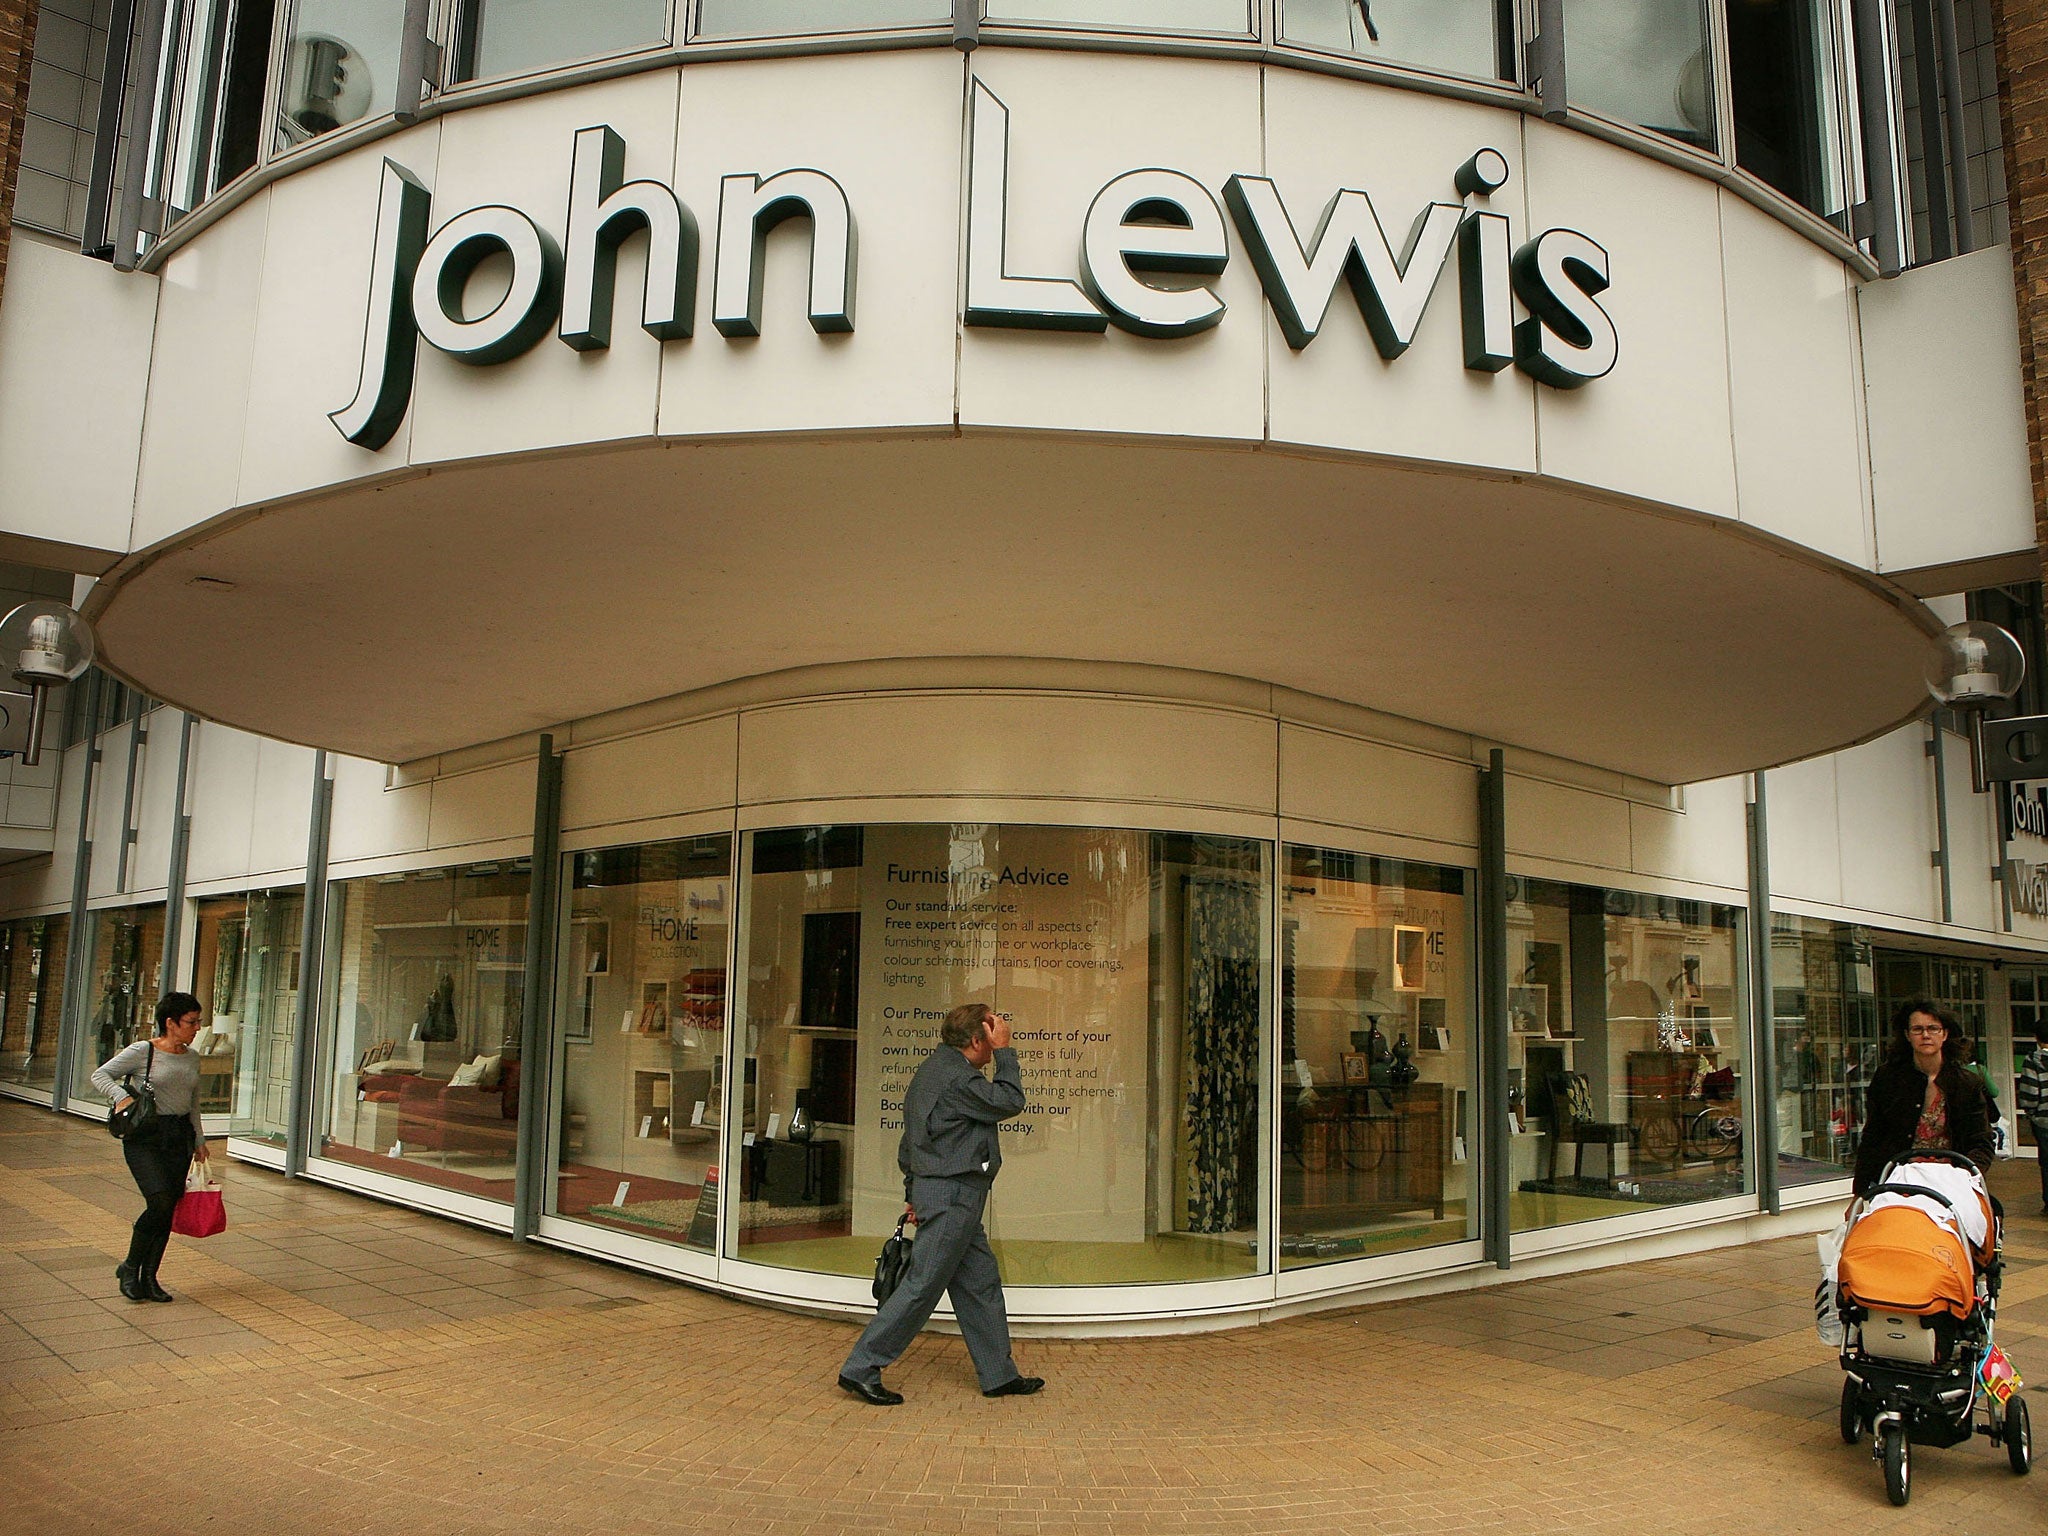 Shoppers pass a John Lewis store on September 11, 2008 in Kingston-Upon-Thames, England.